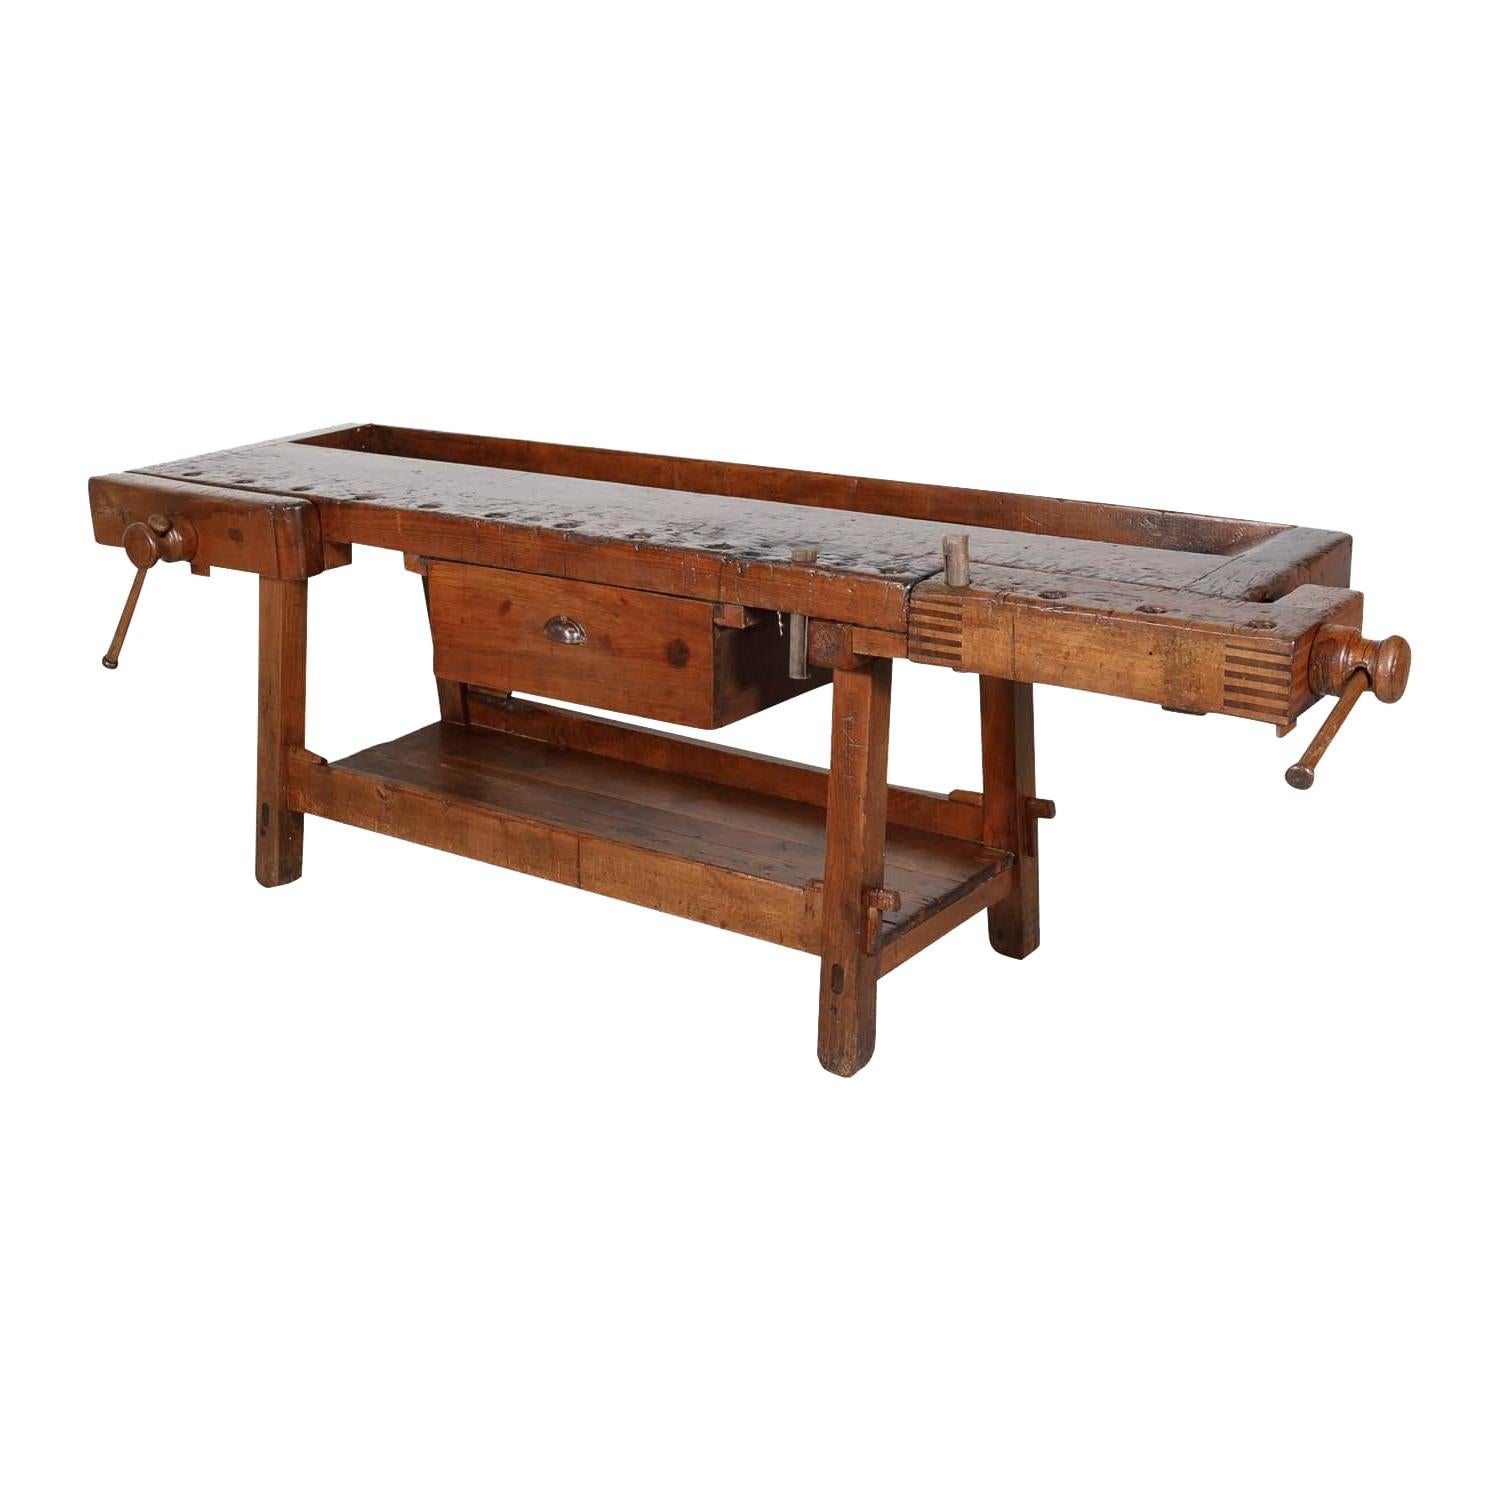 19th Century French Etabli or Carpenter’s Workbench with Two Vises